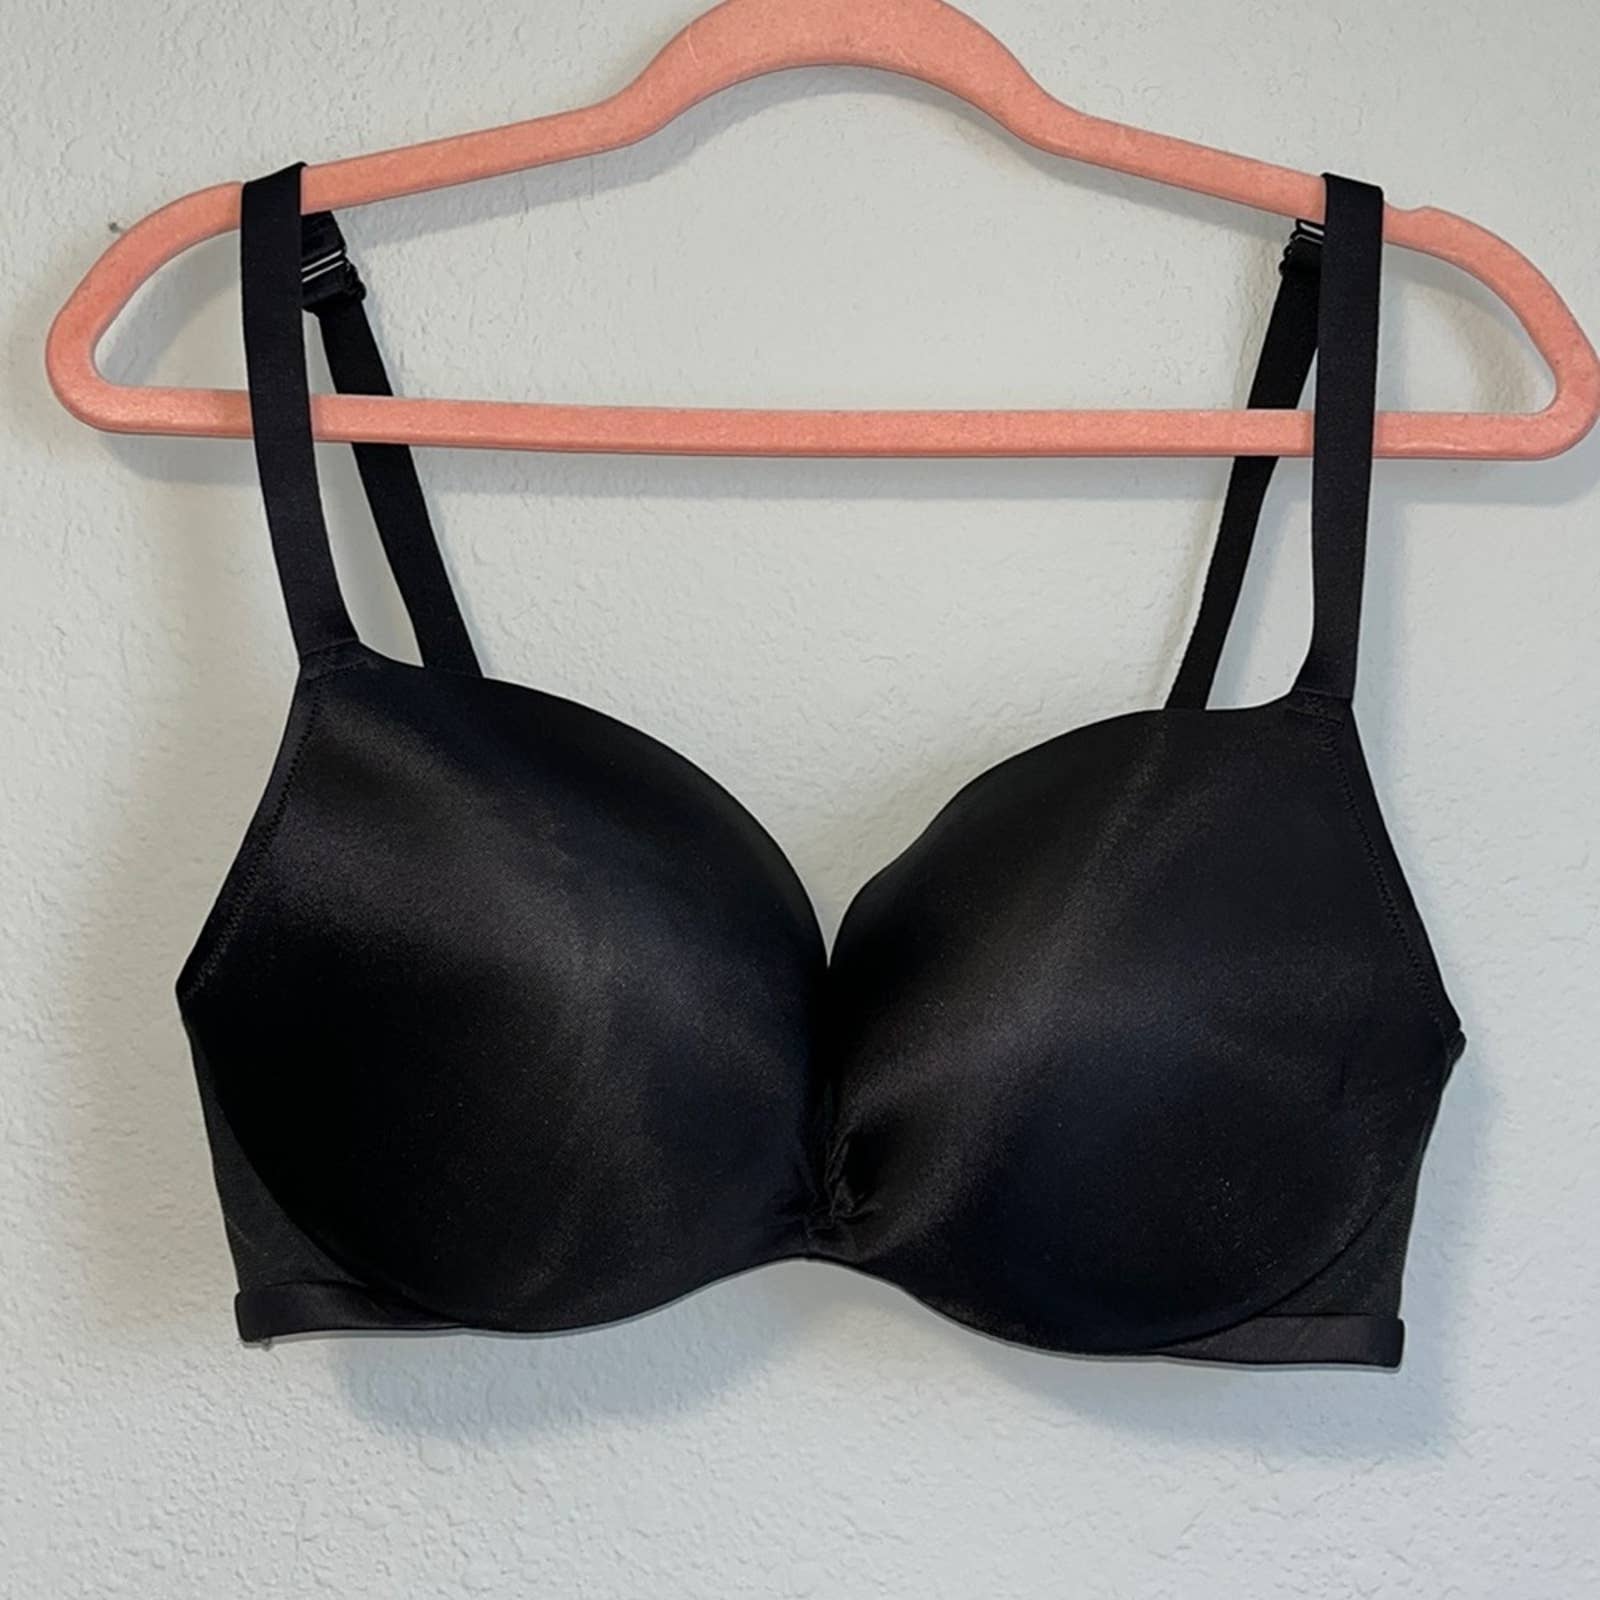 Cacique, Intimates & Sleepwear, Cacique Smooth Black Boost Plunge Padded Bra  Size 38ddd Underwire Molded Cups